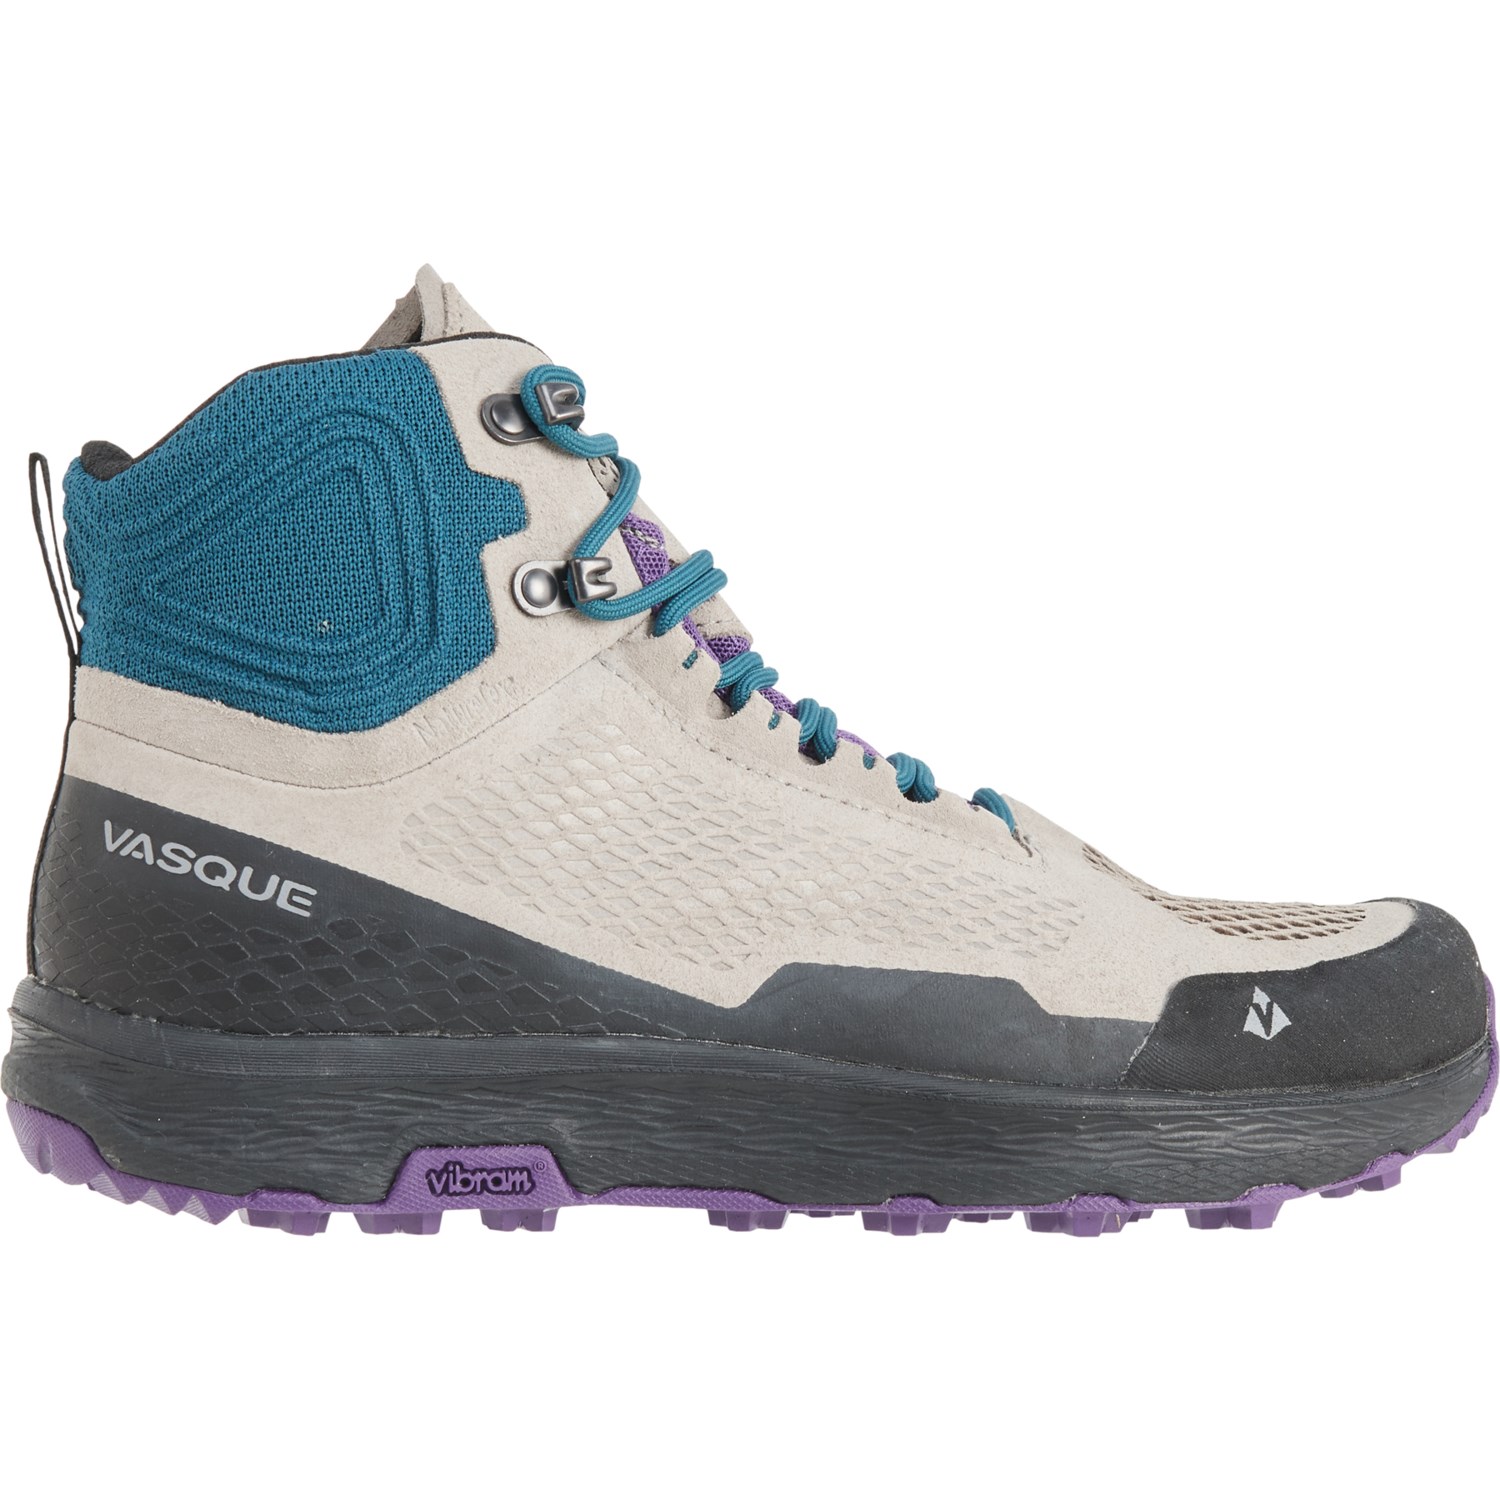 Vasque Breeze LT NTX Mid Hiking Boots (For Women) - Save 60%